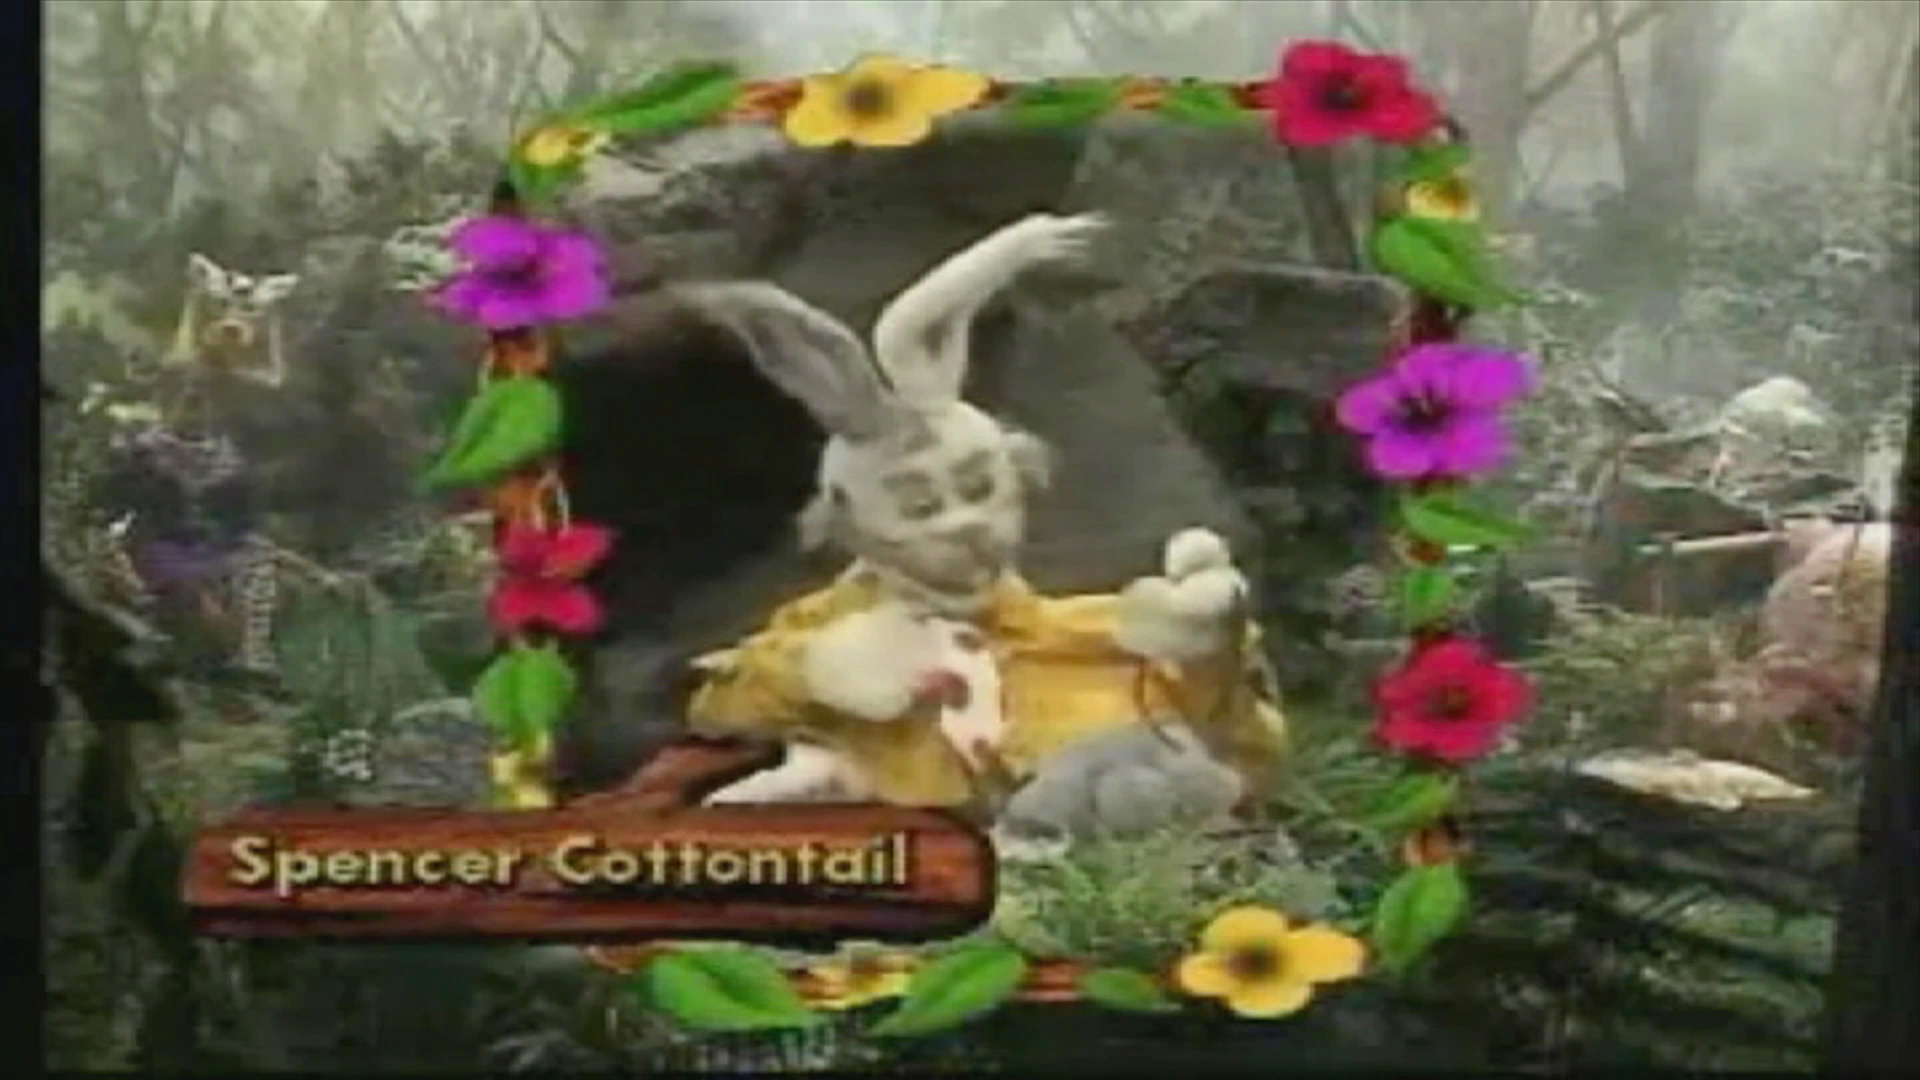 ANN - Spencer Cottontail